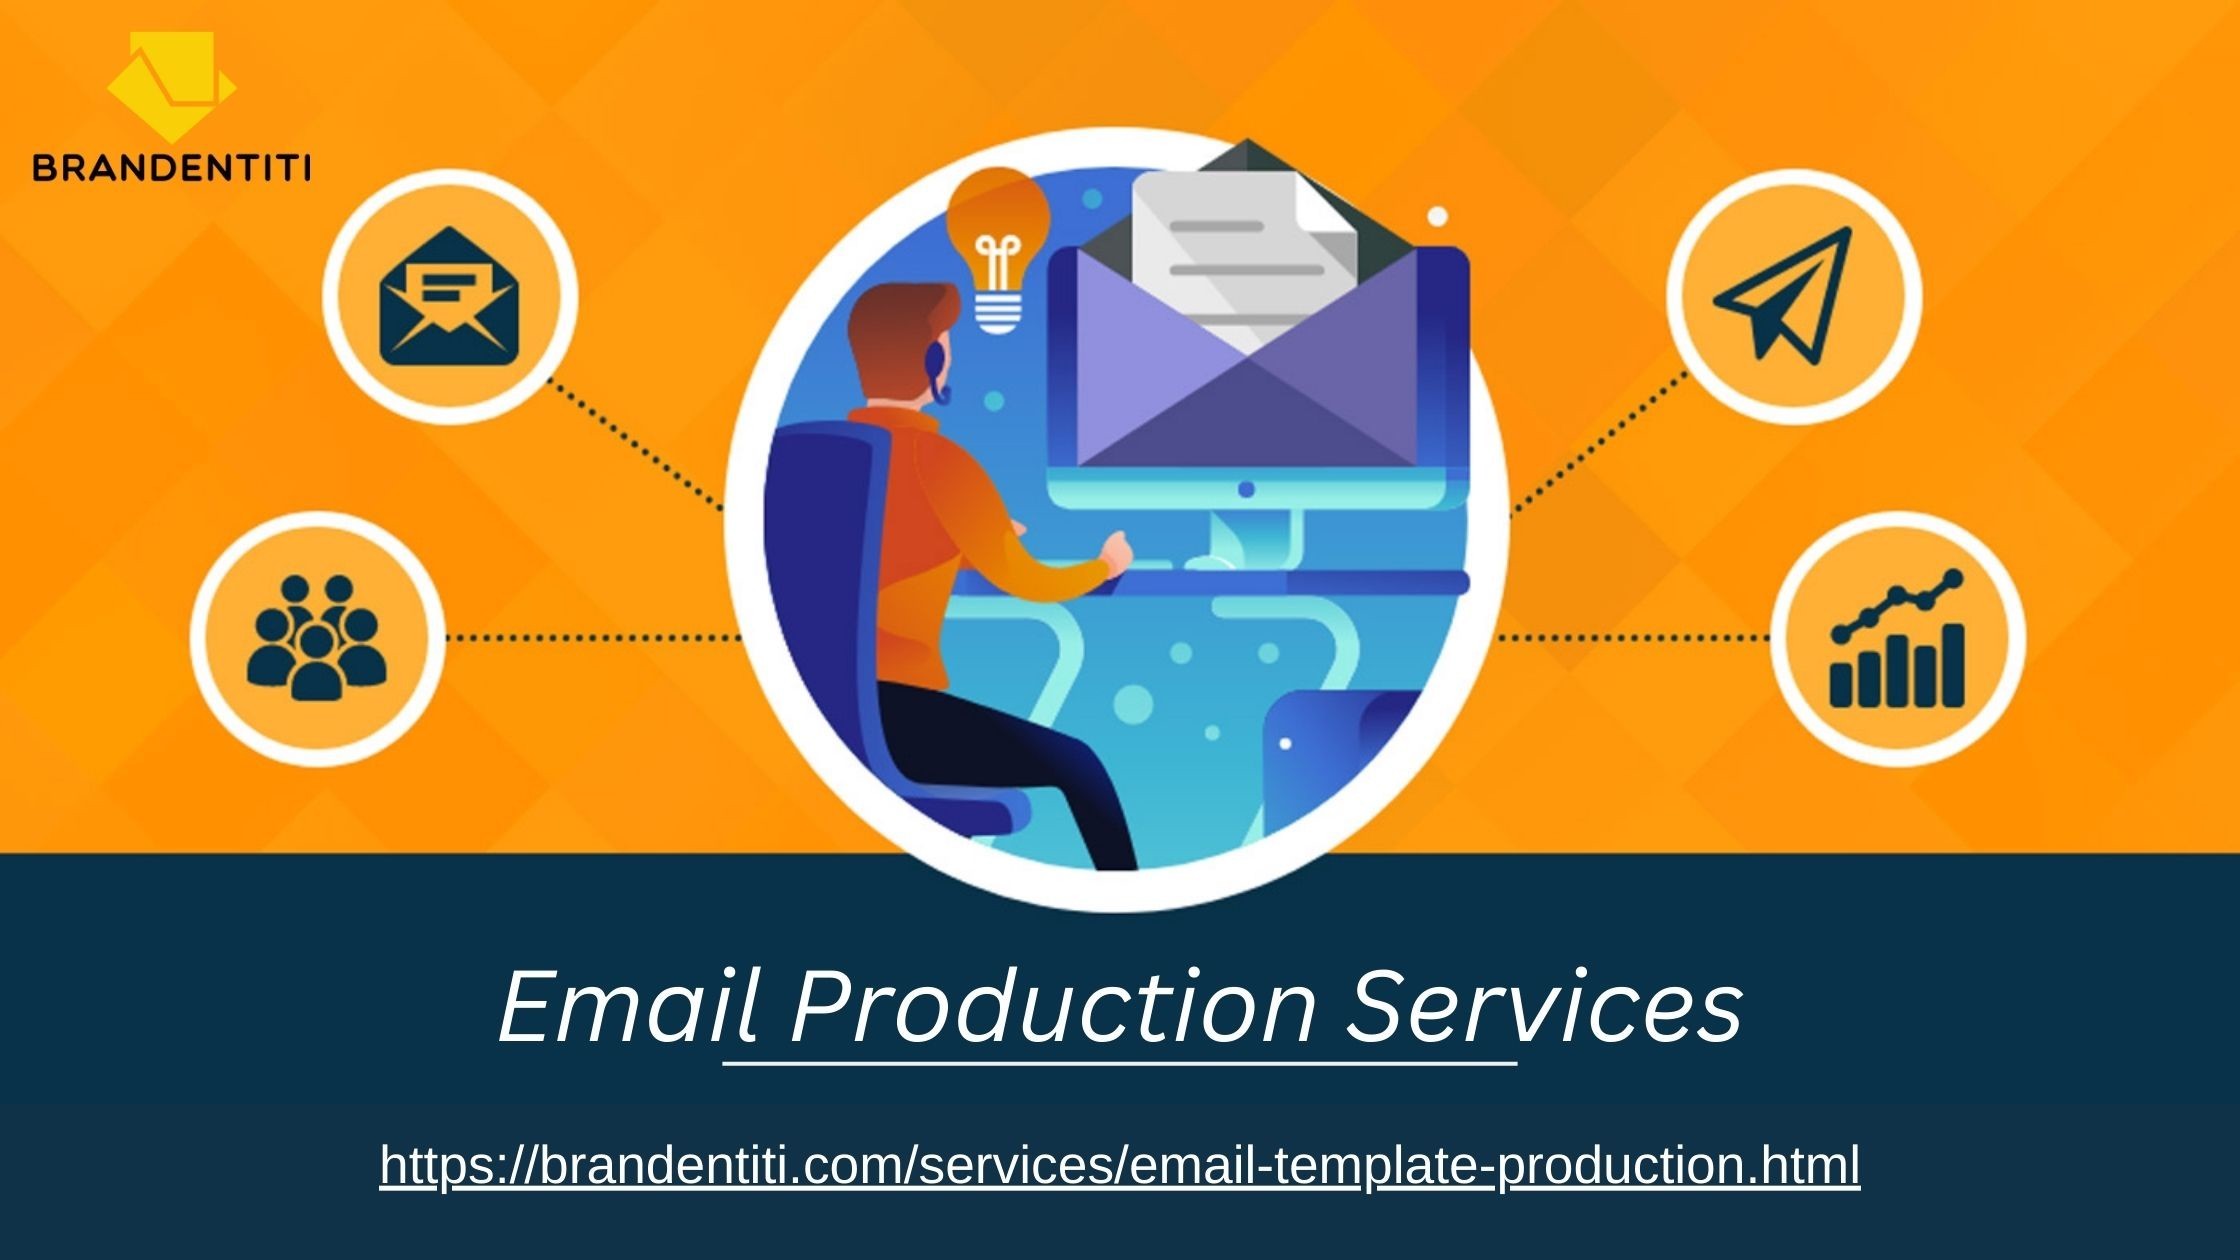 Transform Your Campaigns with Brandentiti's Email Production Services